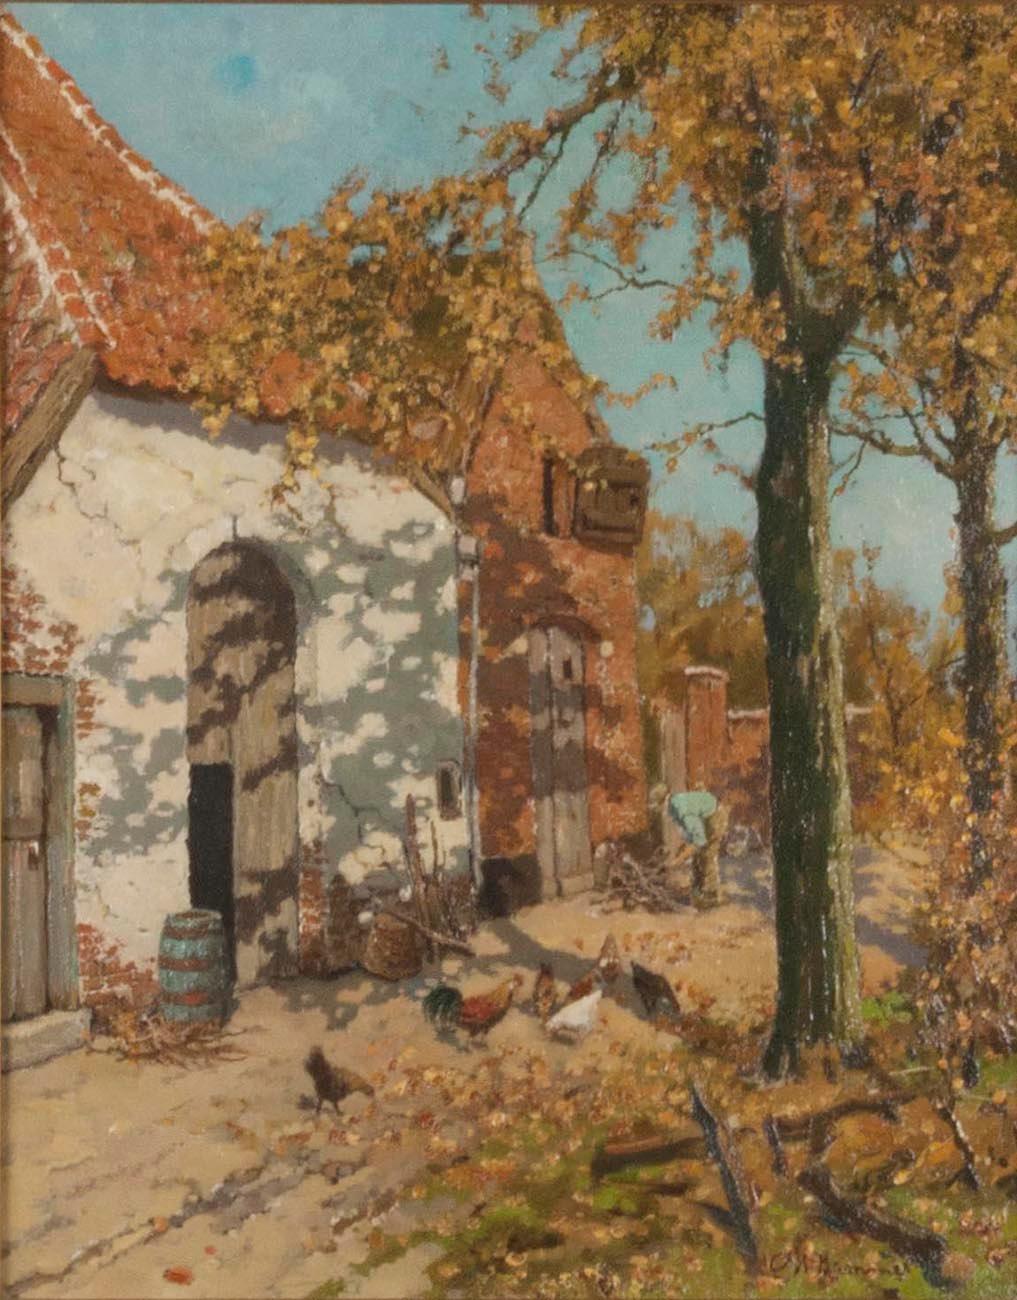 Romantic Early 20th Century Oil Painting of a Farm with Chickens in The Yard